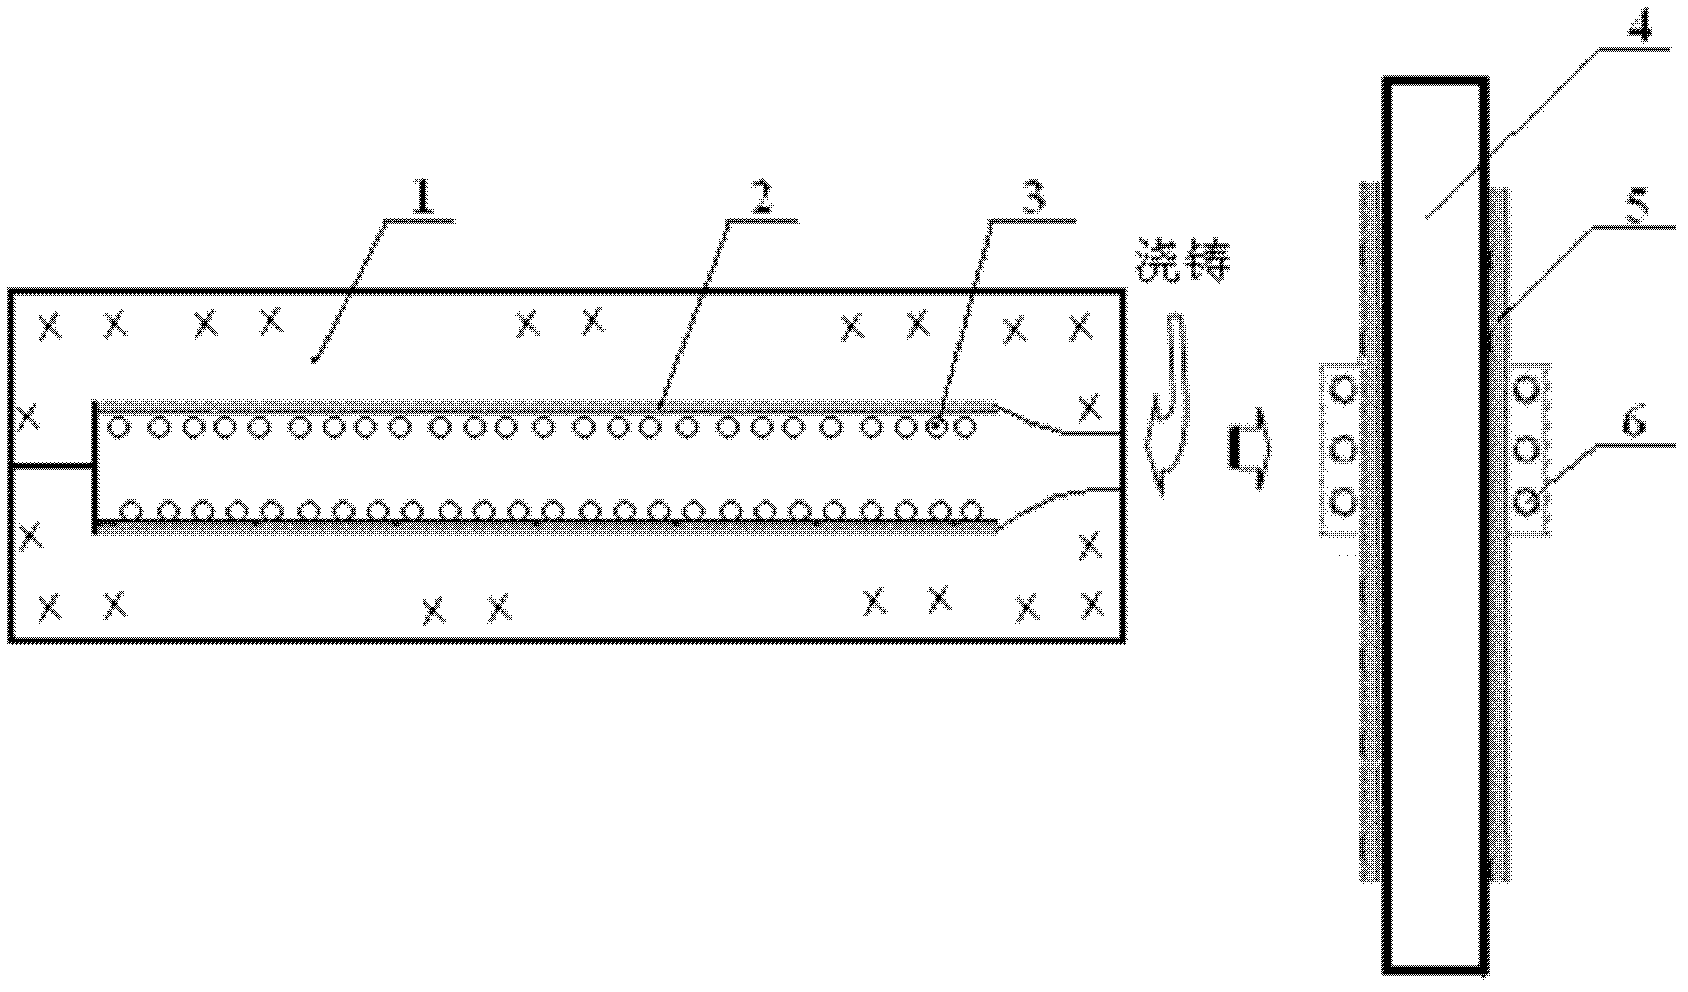 Preparation method of tungsten carbide particle enhanced steel-base surface layer composite bar